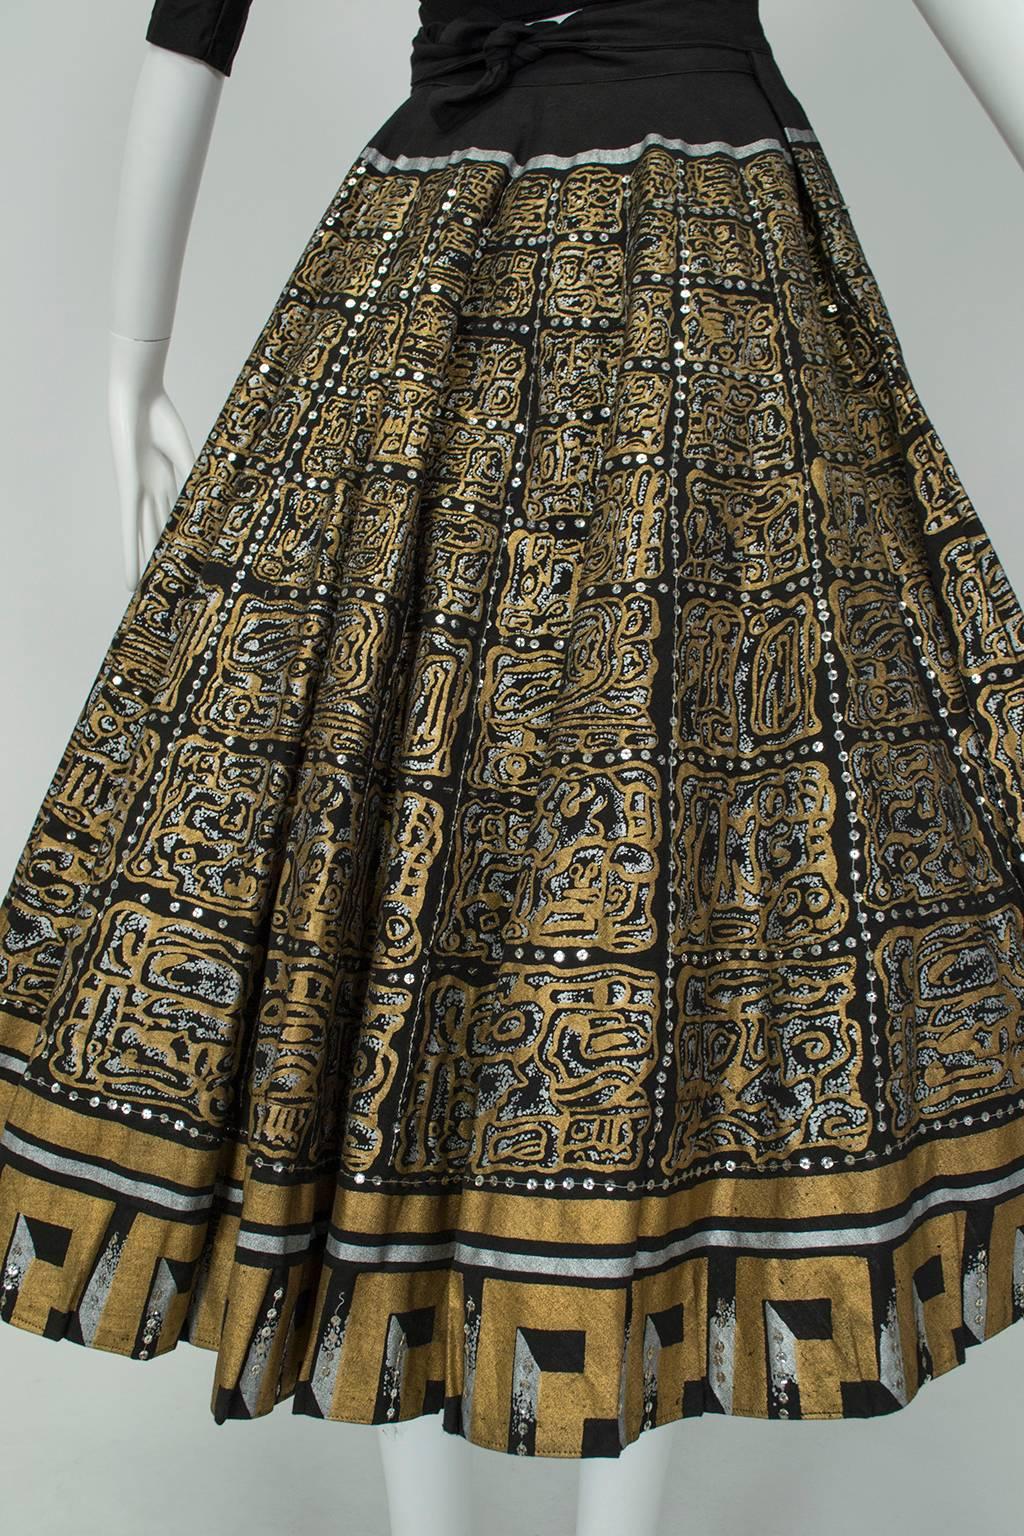 Women's Hand Painted Black and Gold Aztec Mexican Circle Skirt - Jácome Estate, 1950s